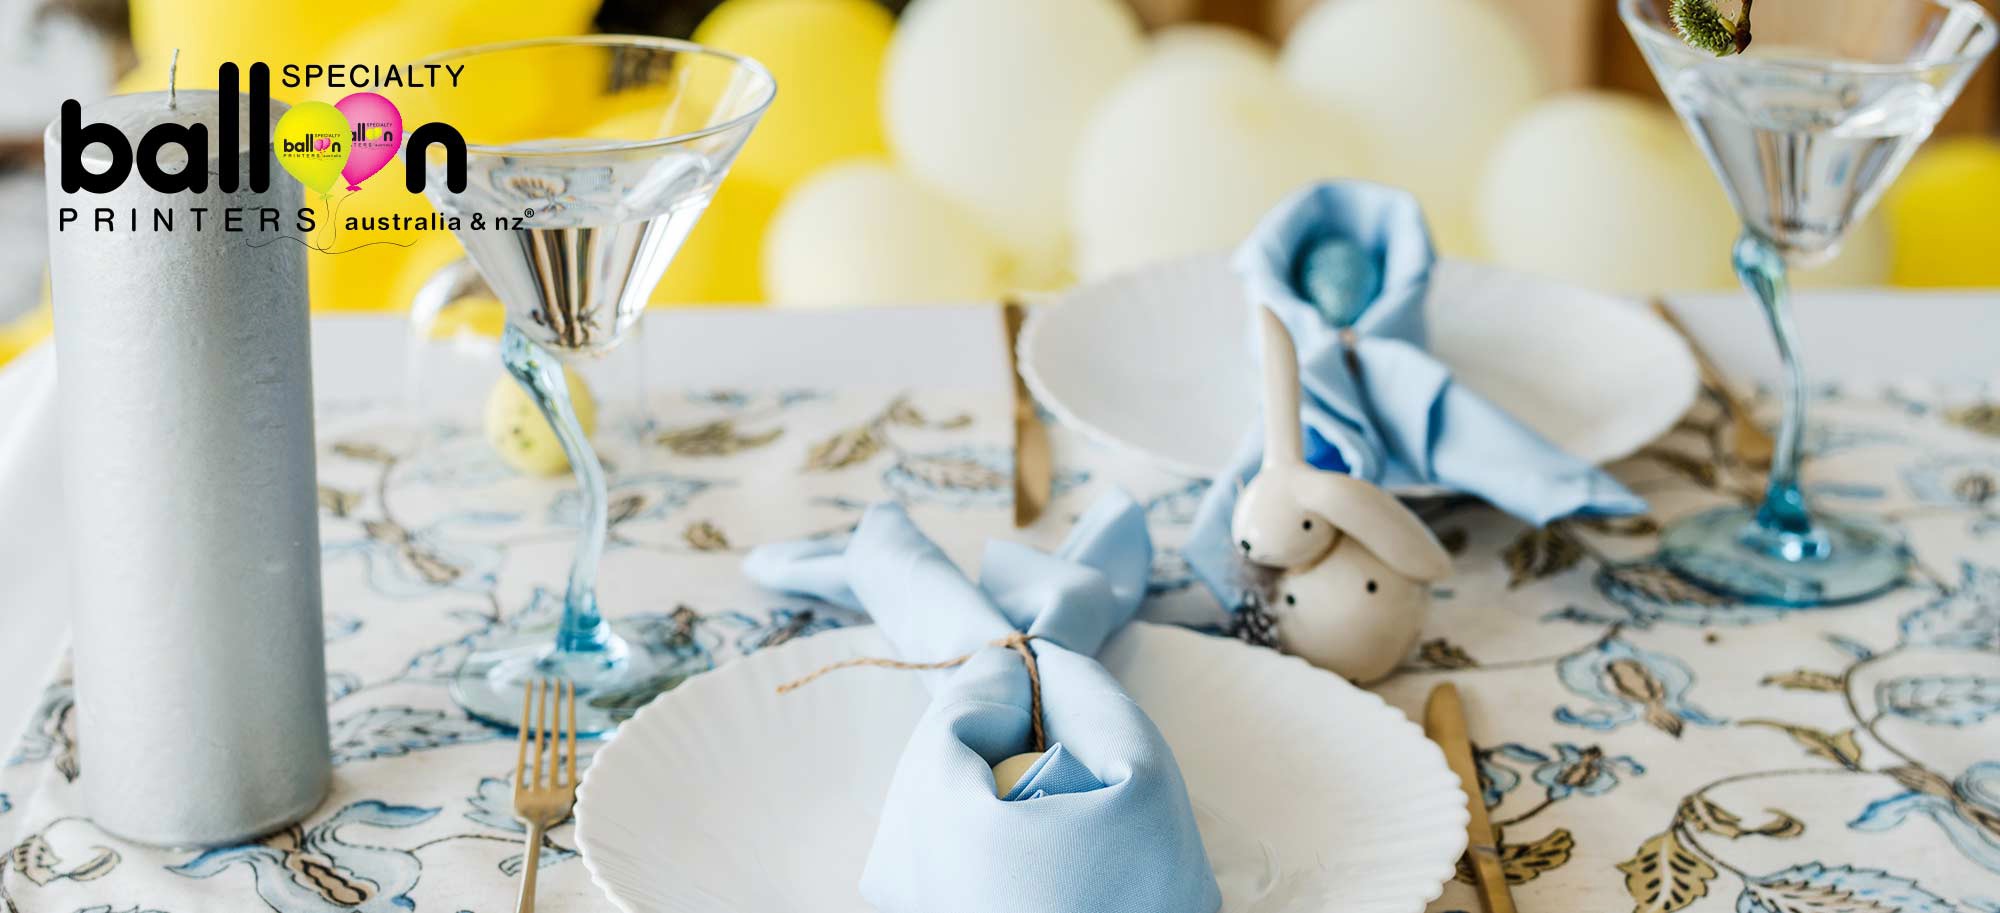 Specialty Balloon Printers Dinner Party Decorating Ideas